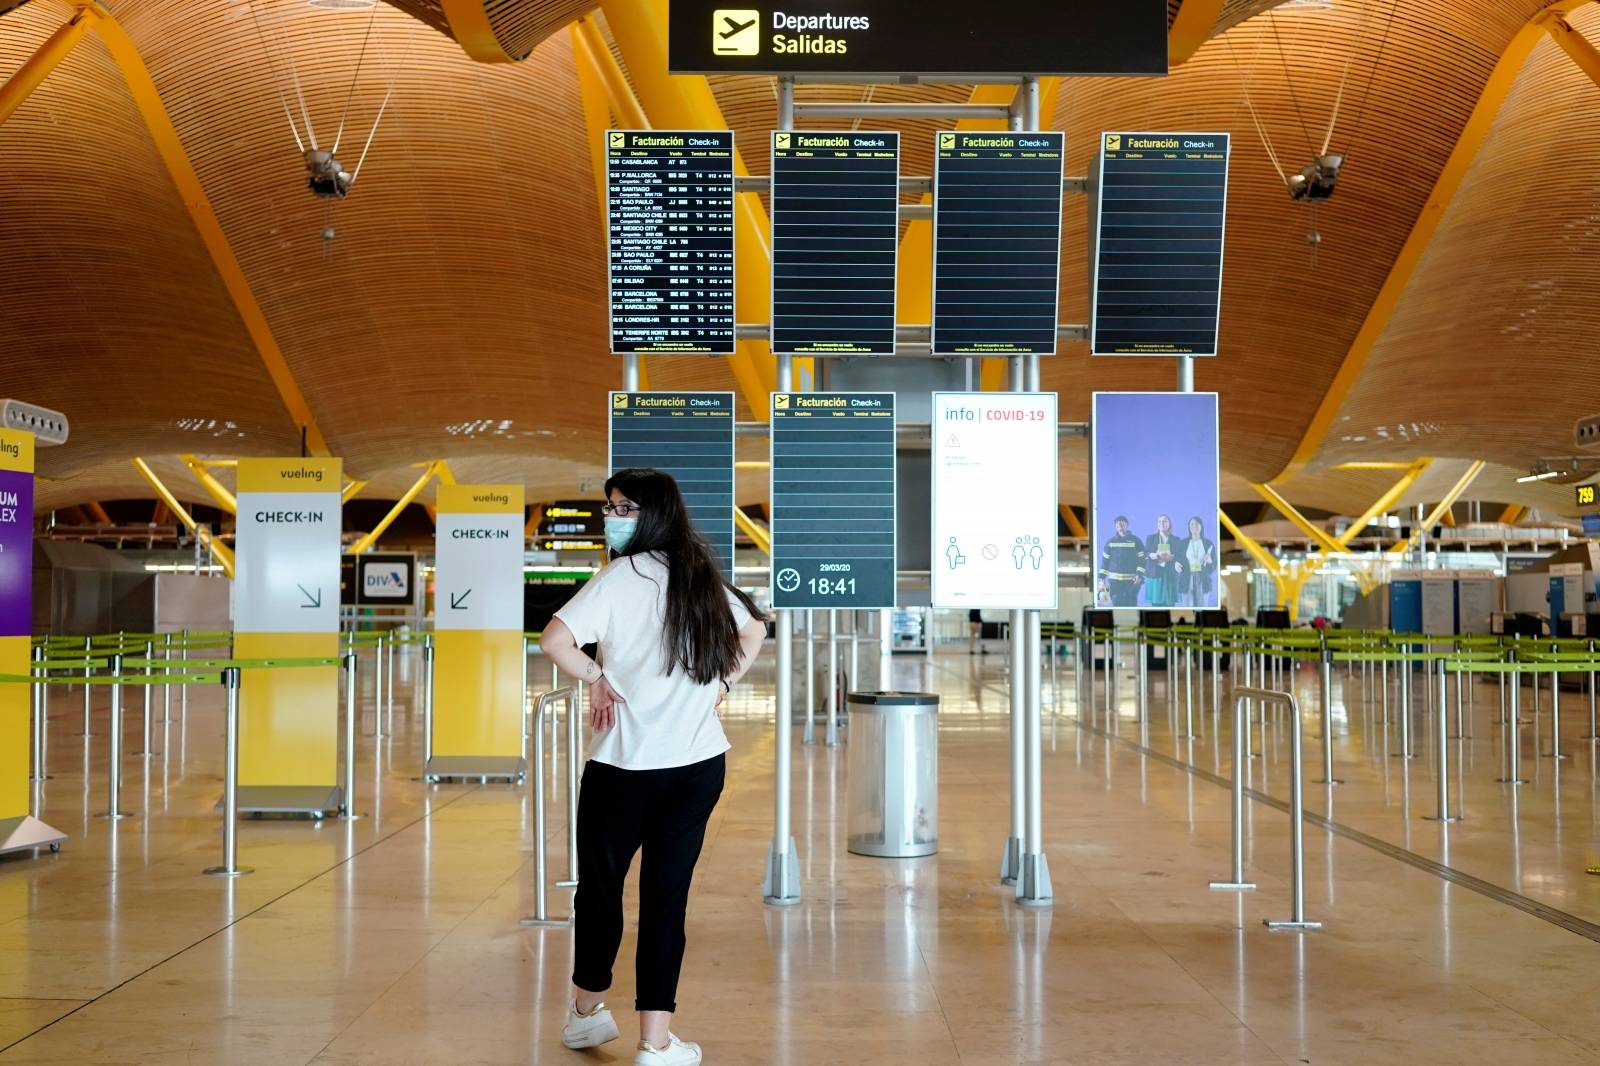 A woman wearing a protective mask stands in front of flight screens at the almost empty Madrid's Adolfo Suarez Barajas Airport